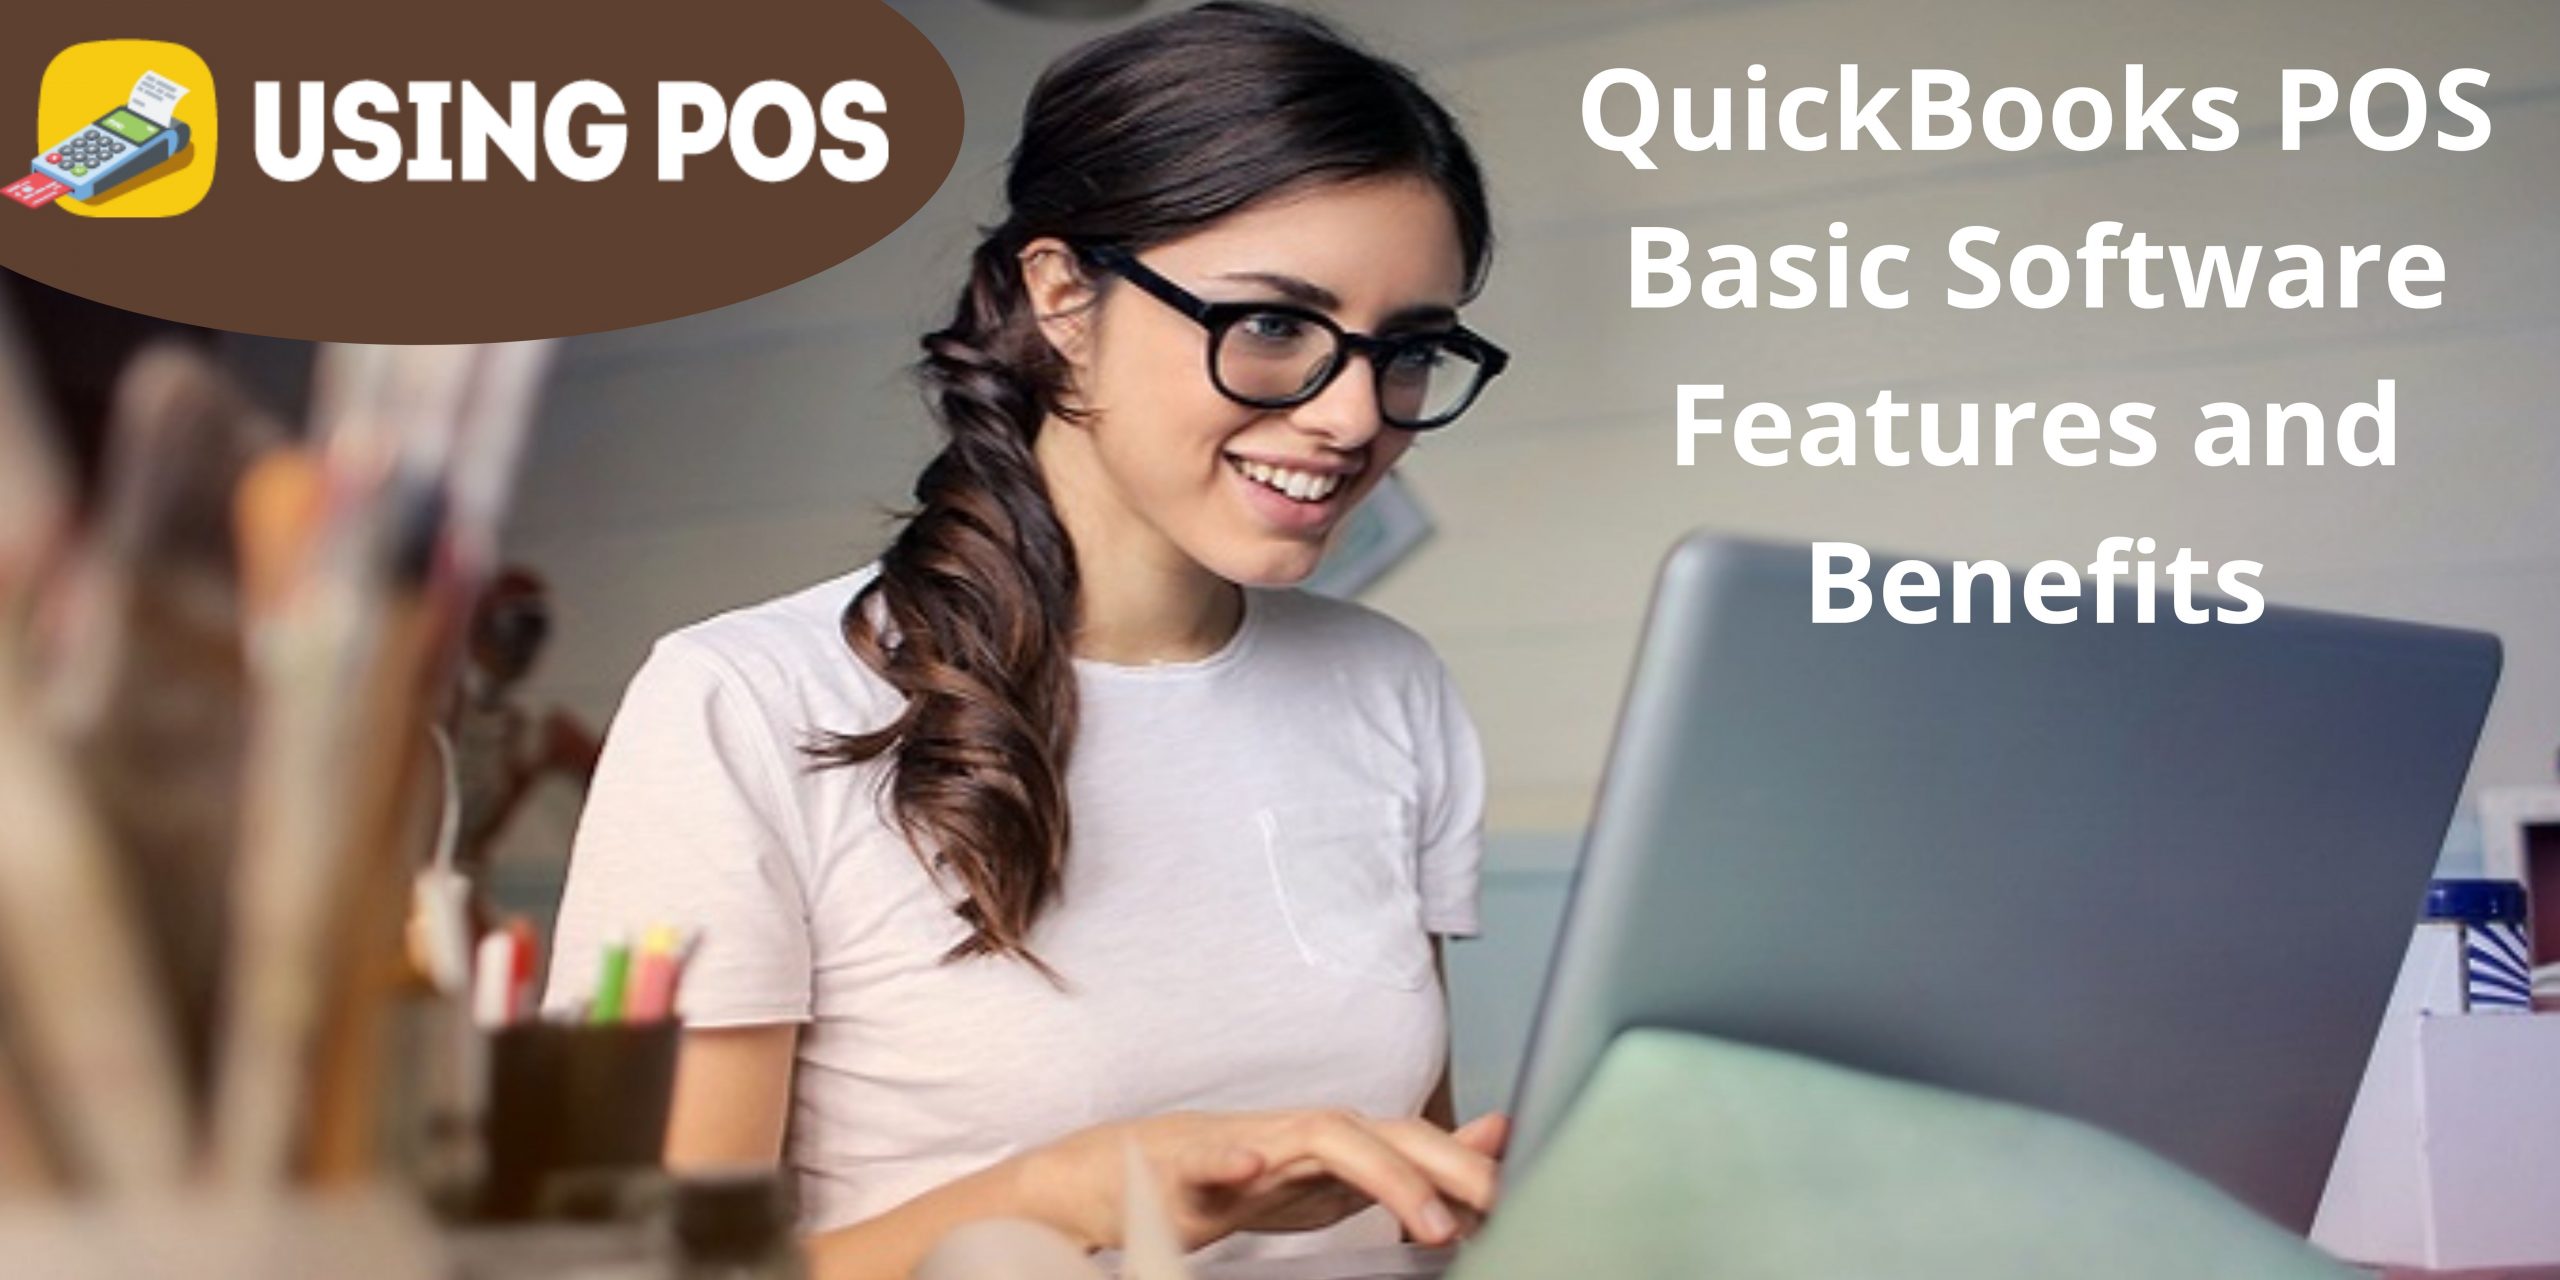 QuickBooks POS Basic Software Features and Benefits